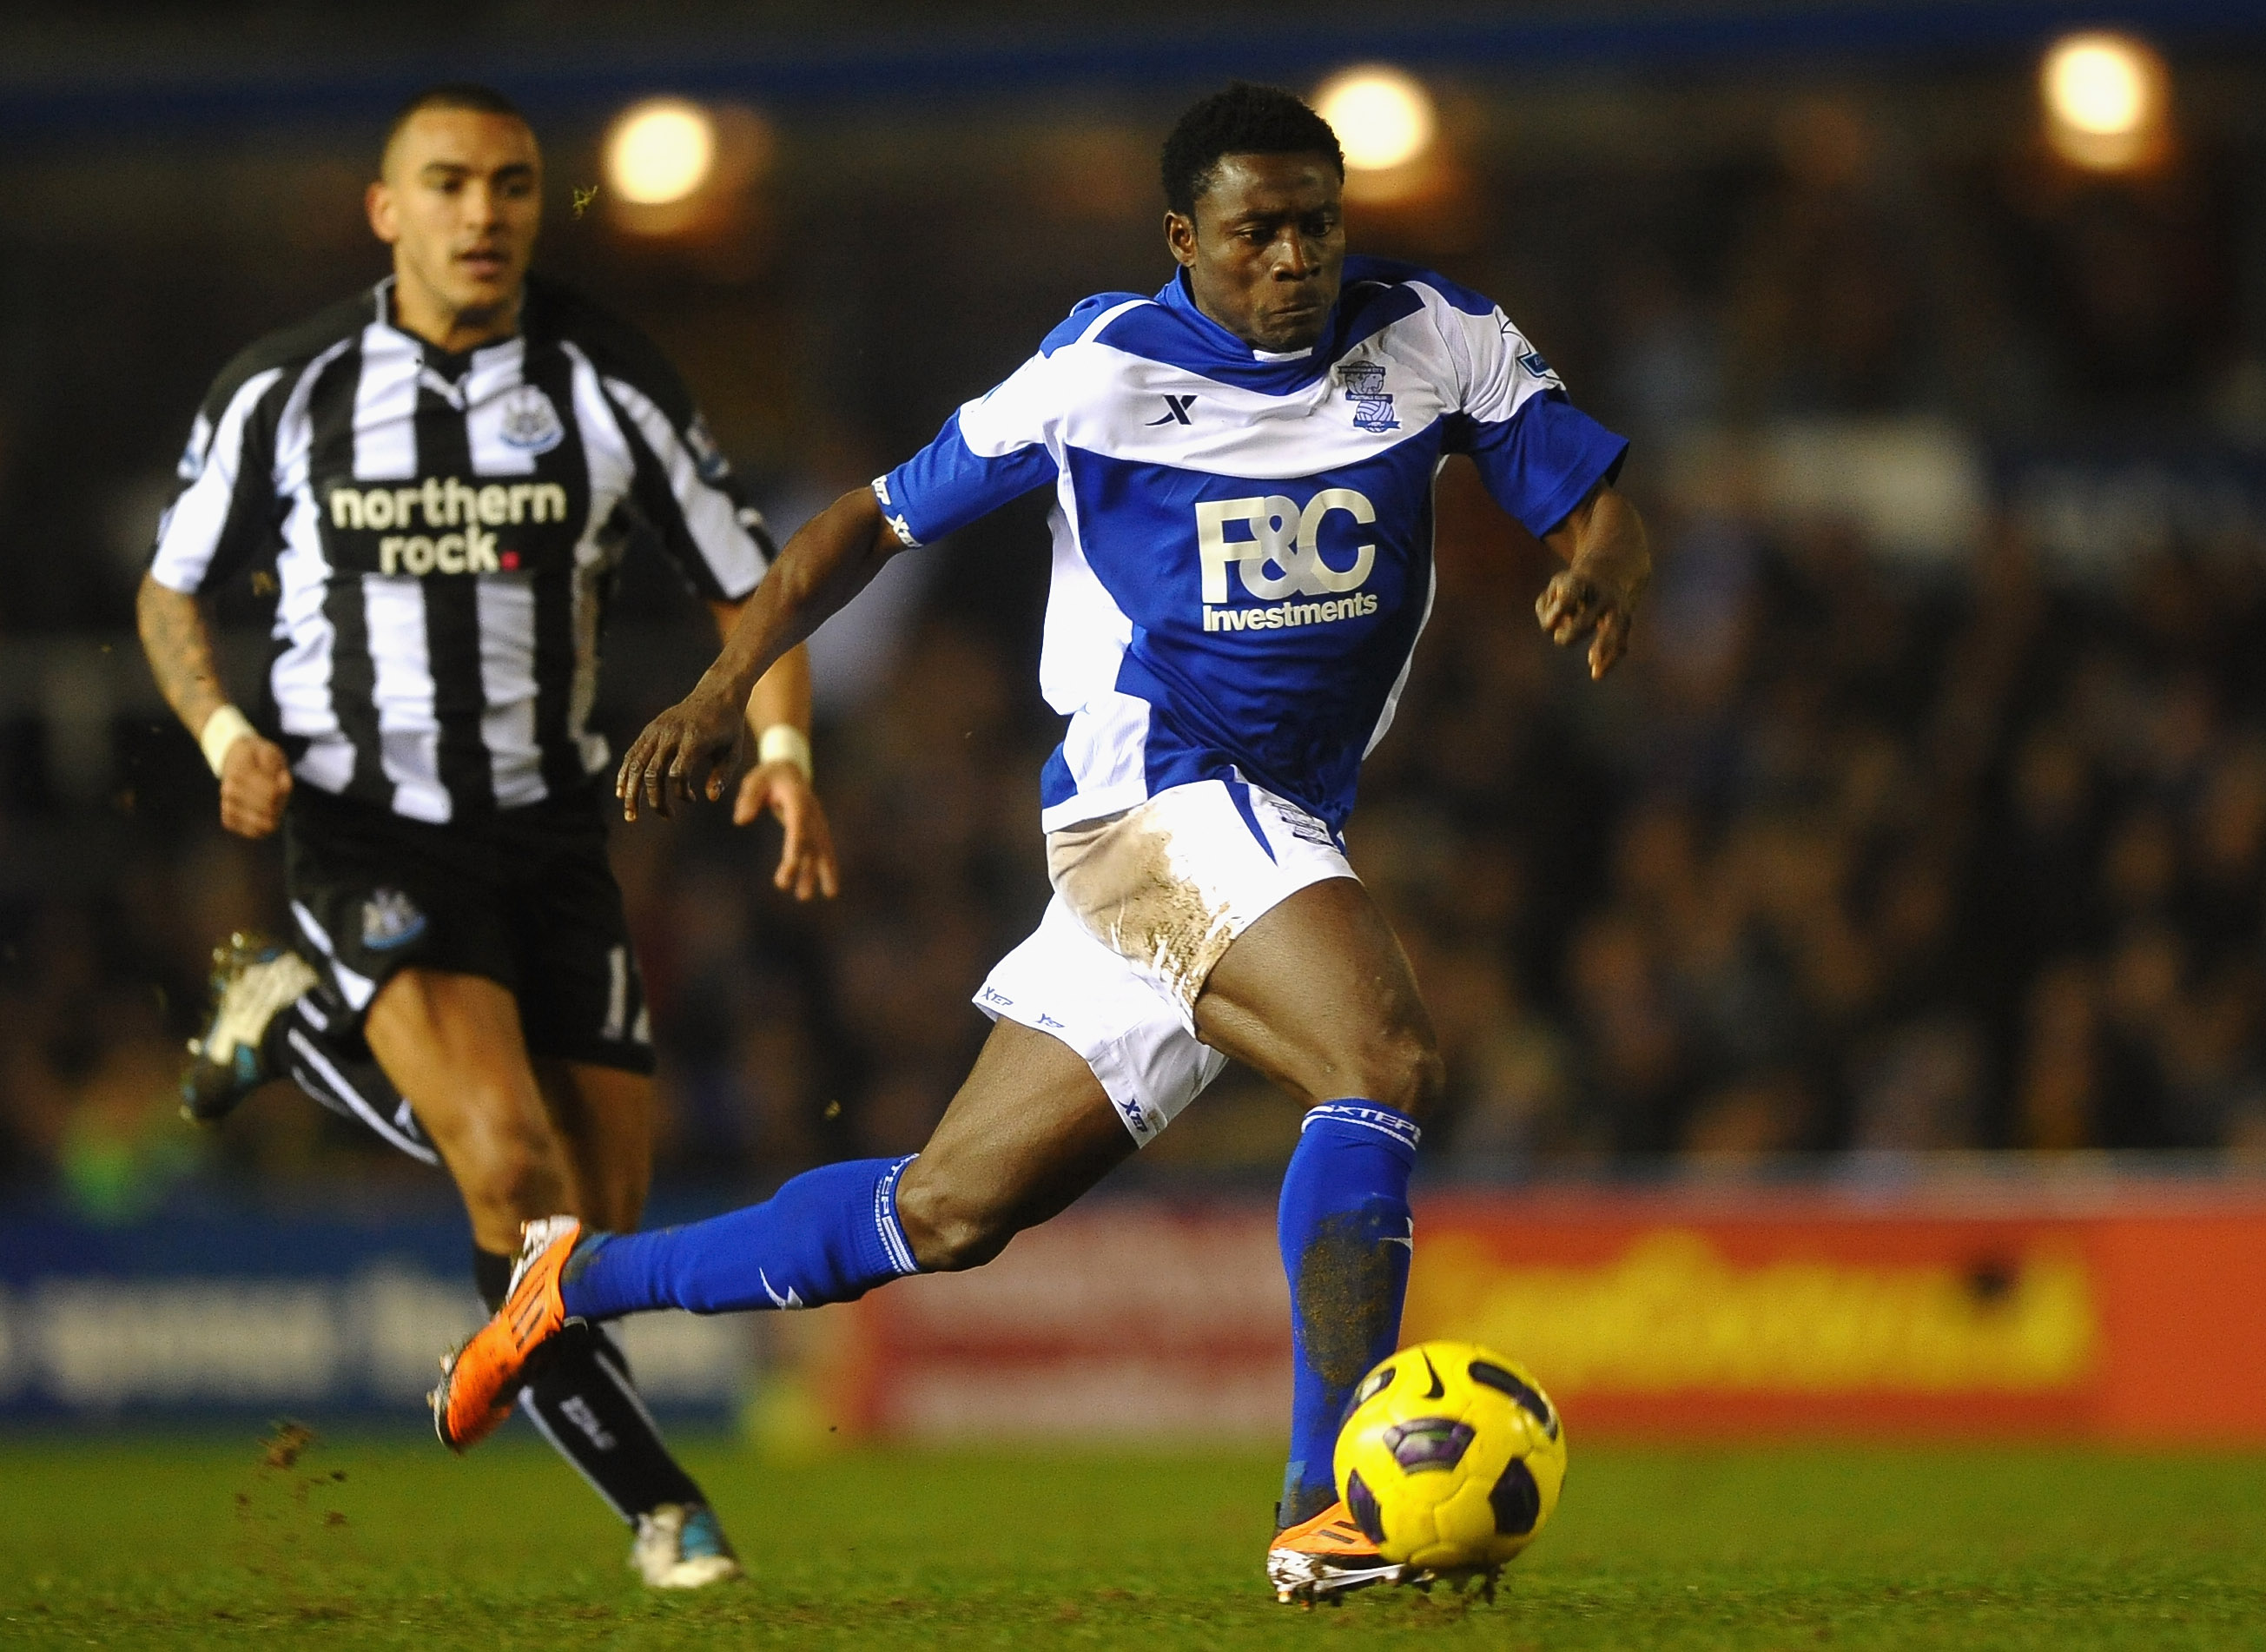 BIRMINGHAM, ENGLAND - FEBRUARY 15: Obafemi Martins of Birmingham City breaks from Danny Simpson of Newcastle United during the Barclays Premier League match between Birmingham City and Newcastle United at St Andrews  on February 15, 2011 in Birmingham, En